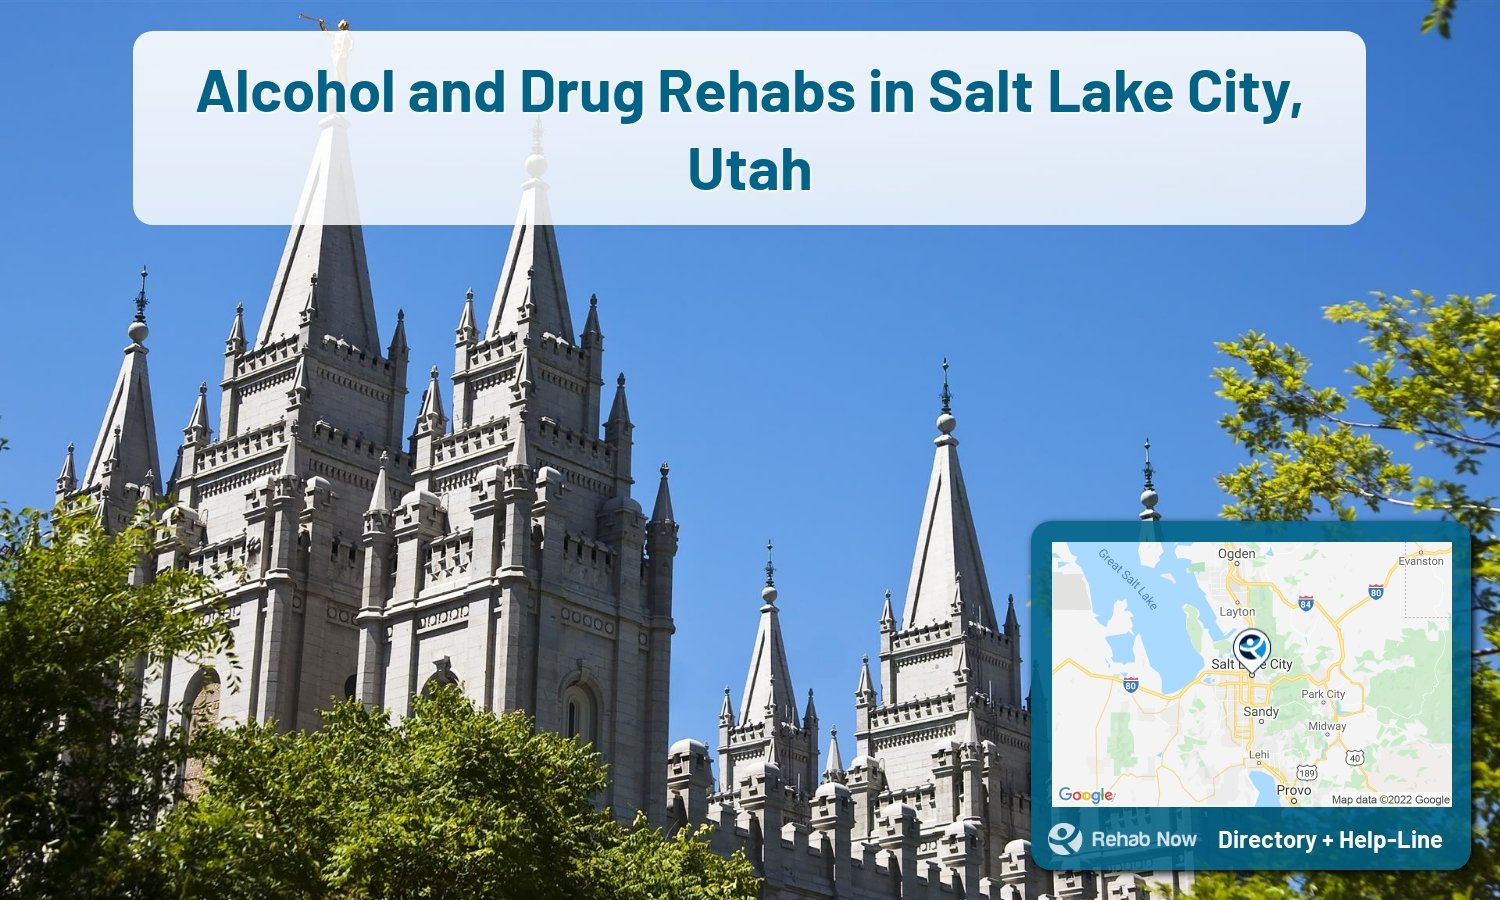 List of alcohol and drug treatment centers near you in Salt Lake City, Utah. Research certifications, programs, methods, pricing, and more.